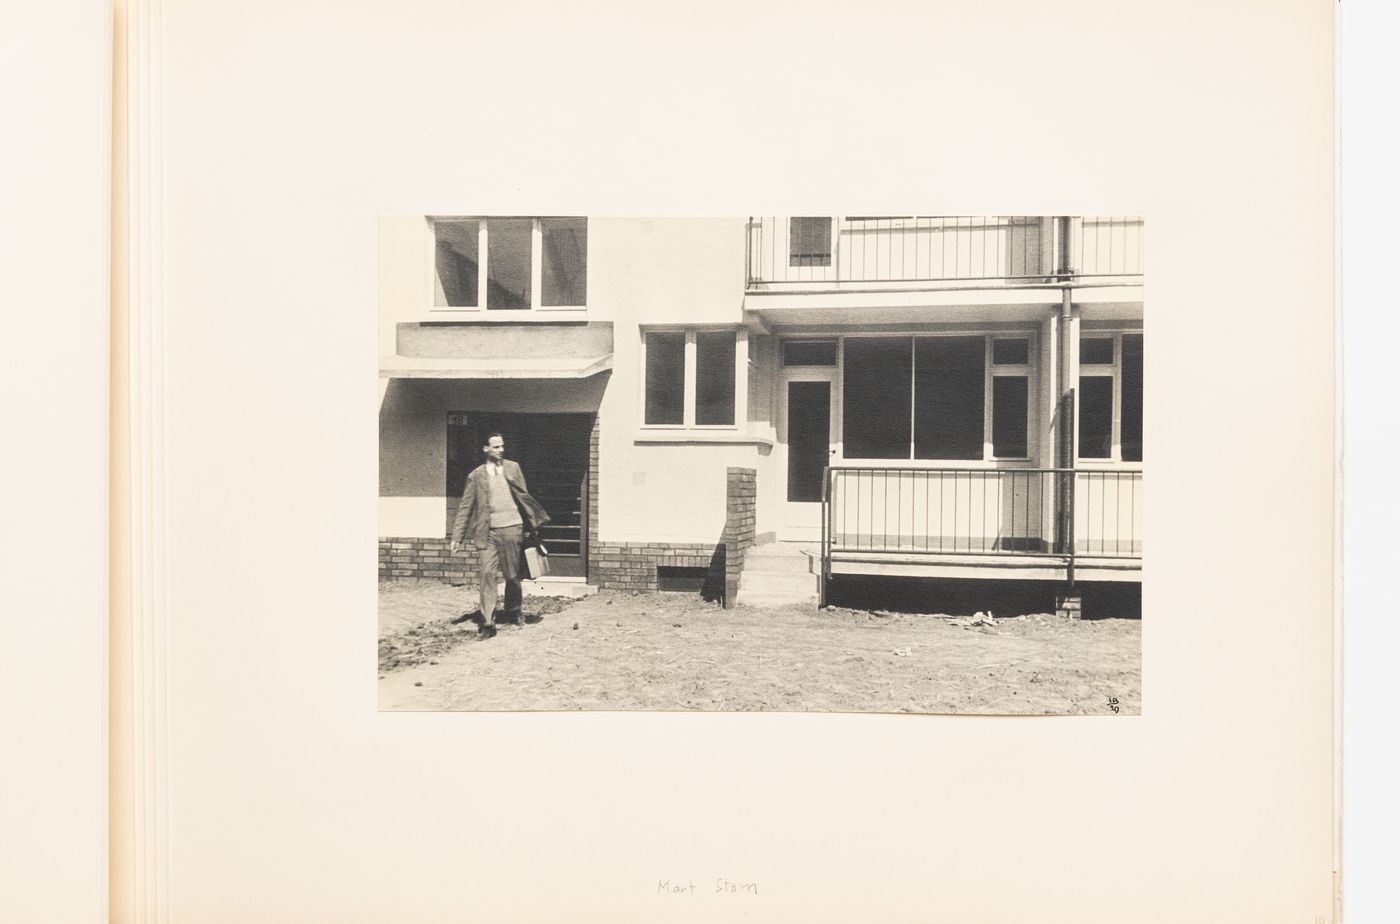 Exterior view of type A housing units with Mart Stam exiting the building, Hellerhof Housing Estate, Frankfurt am Main, Germany